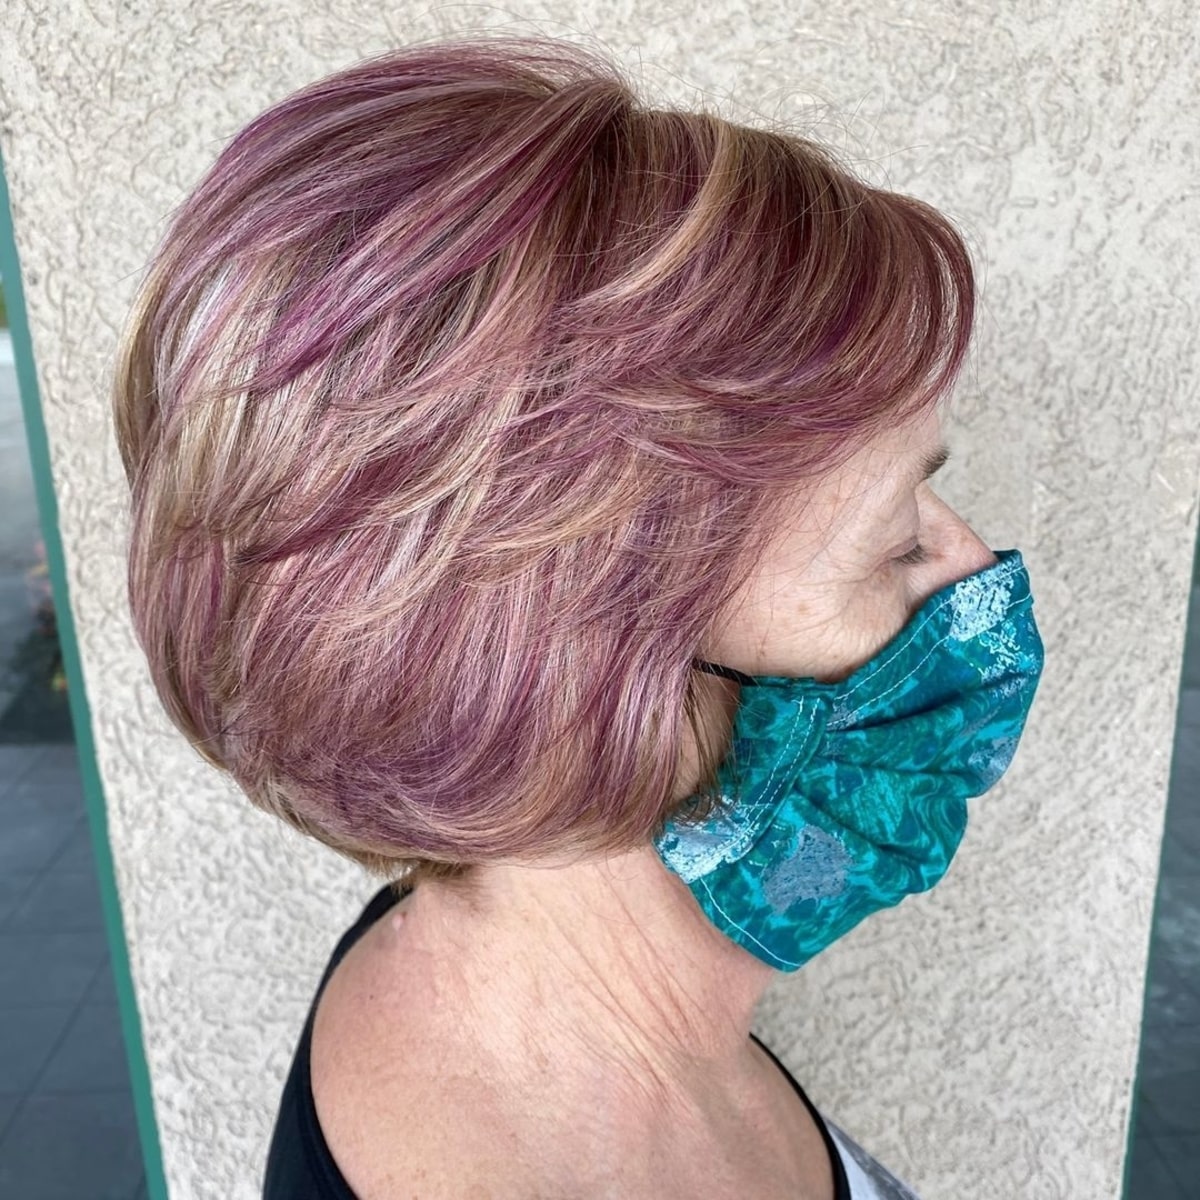 Dirty blonde with purple ends for women over 50